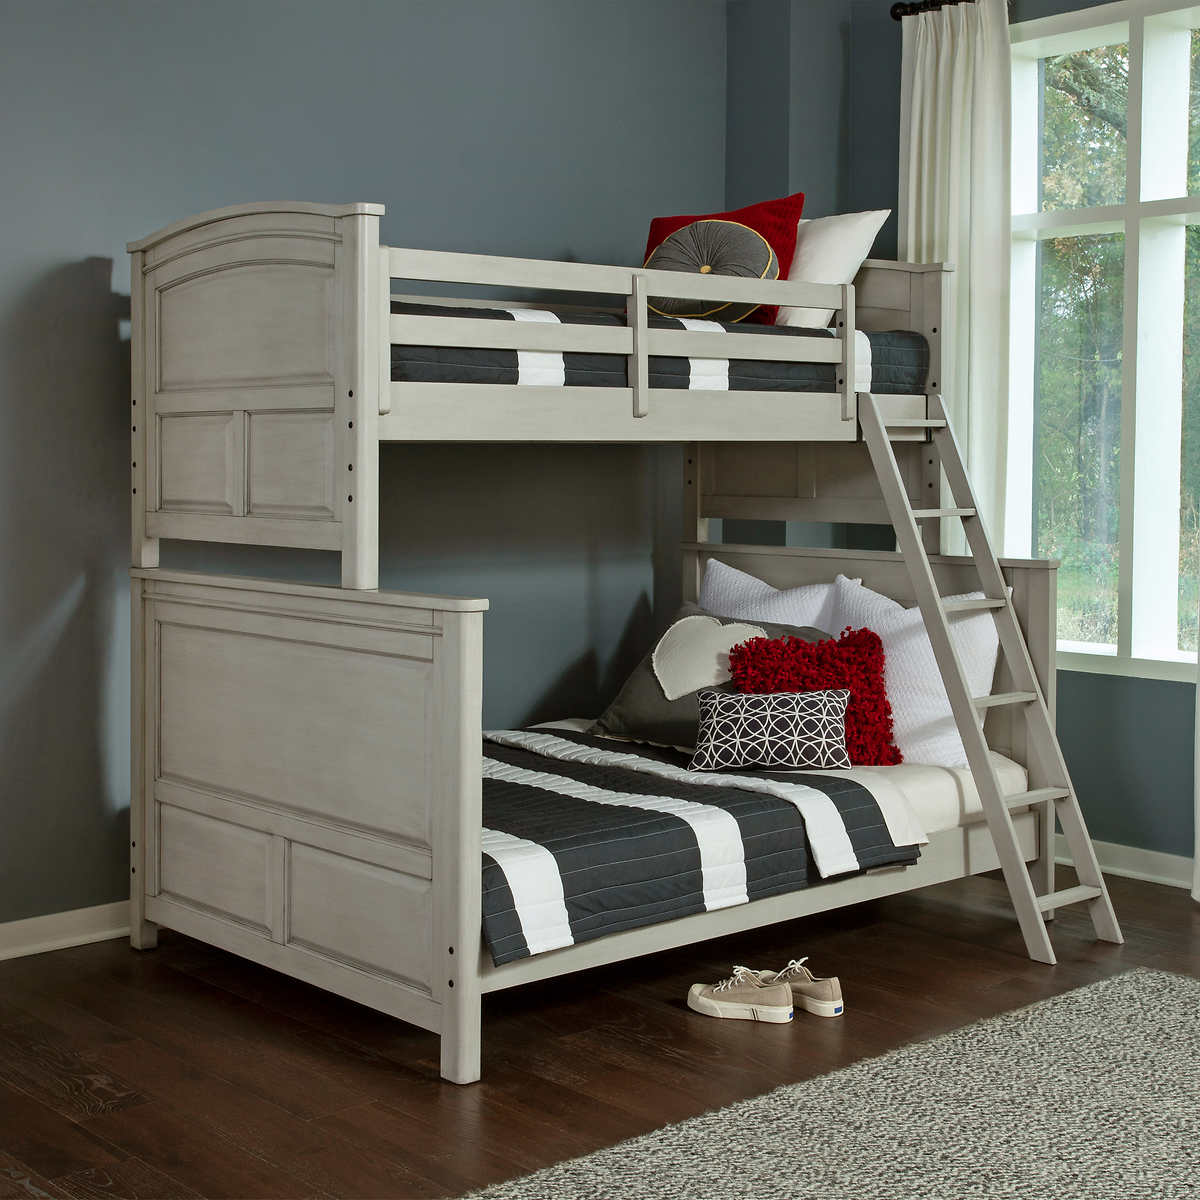 Wingate Twin Over Full Bunk Bed Costco, Full On Full Bunk Bed